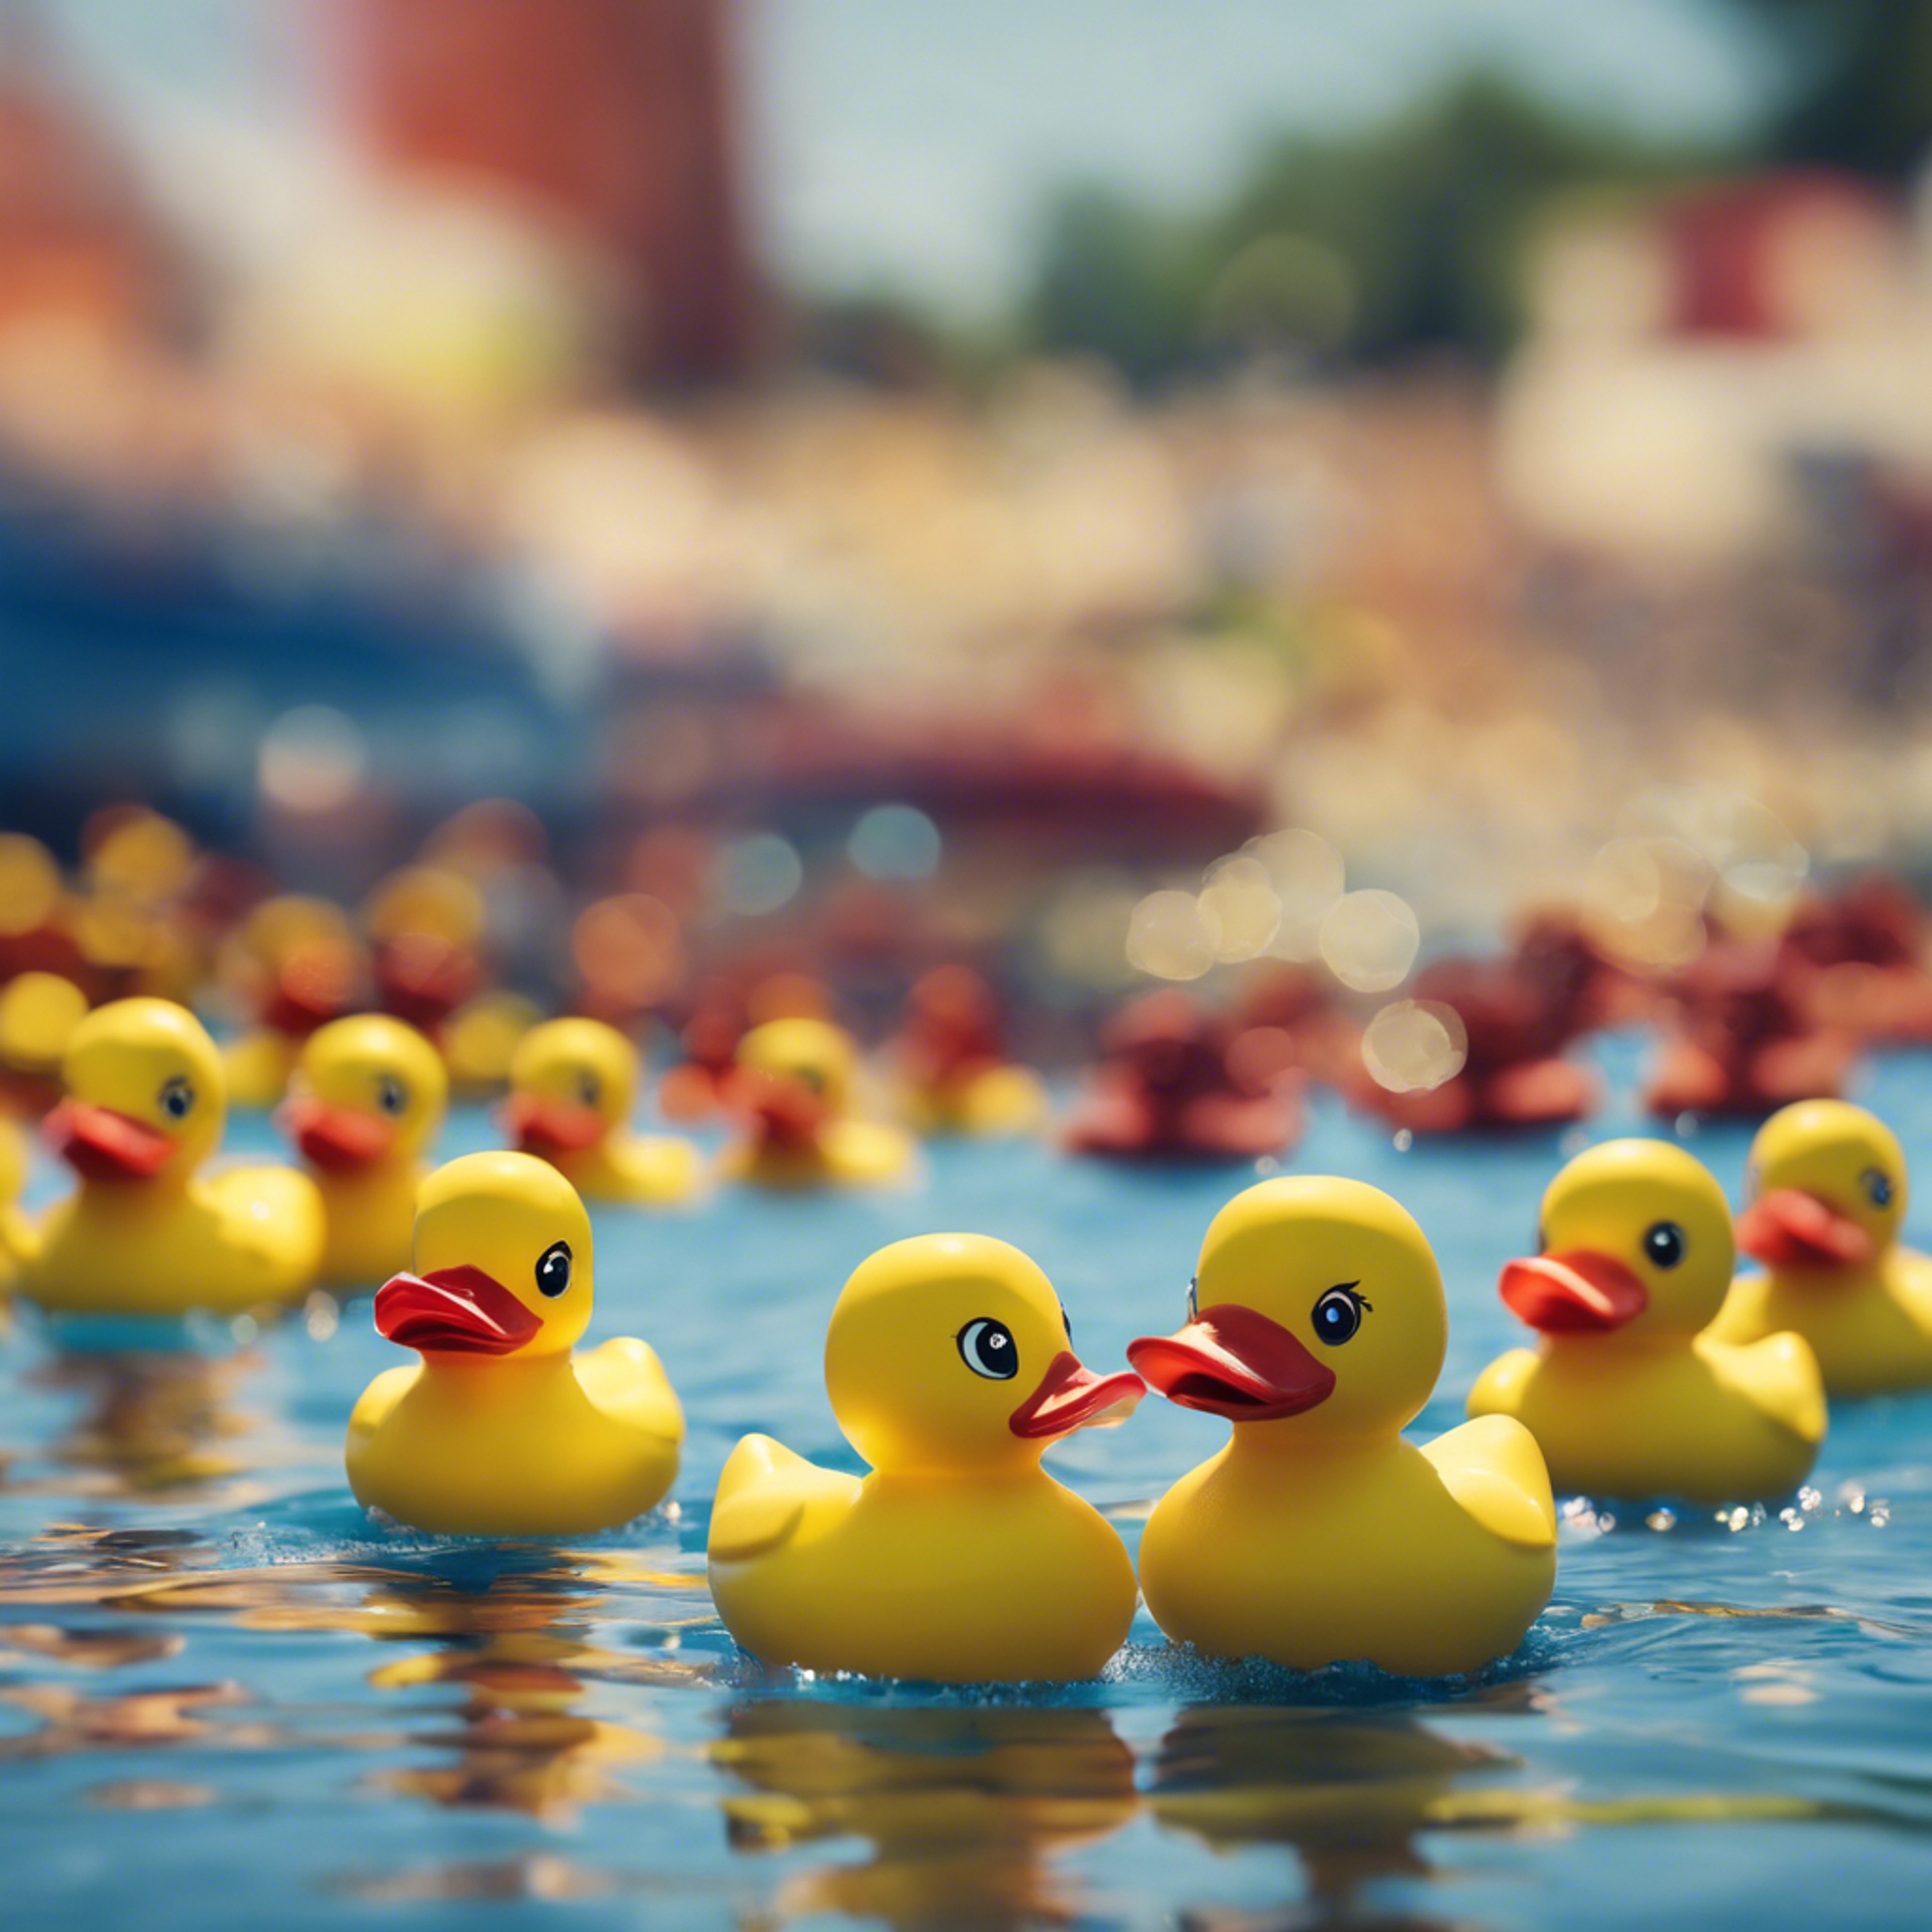 A team of vibrant rubber ducks lined up for a fun bath-time race. Ფონი[f8bfe643527940e89331]